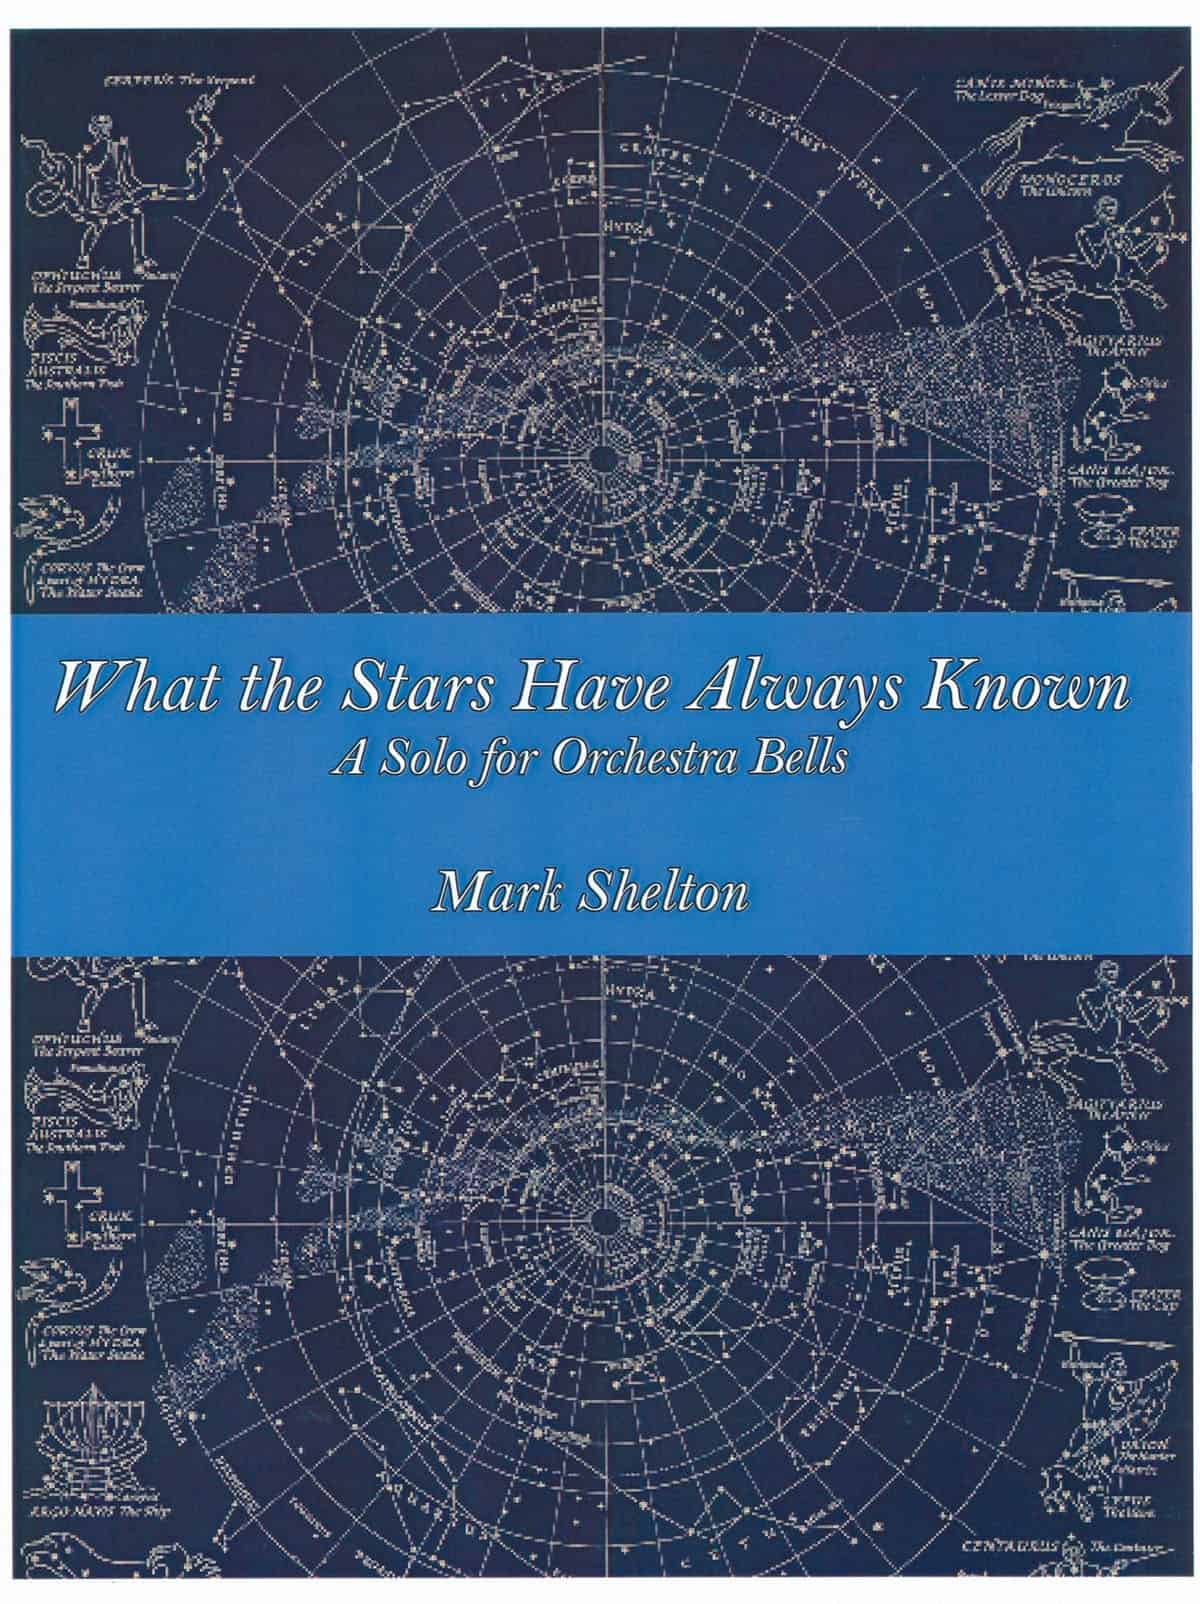 What the Stars Have Always Known by Mark Shelton